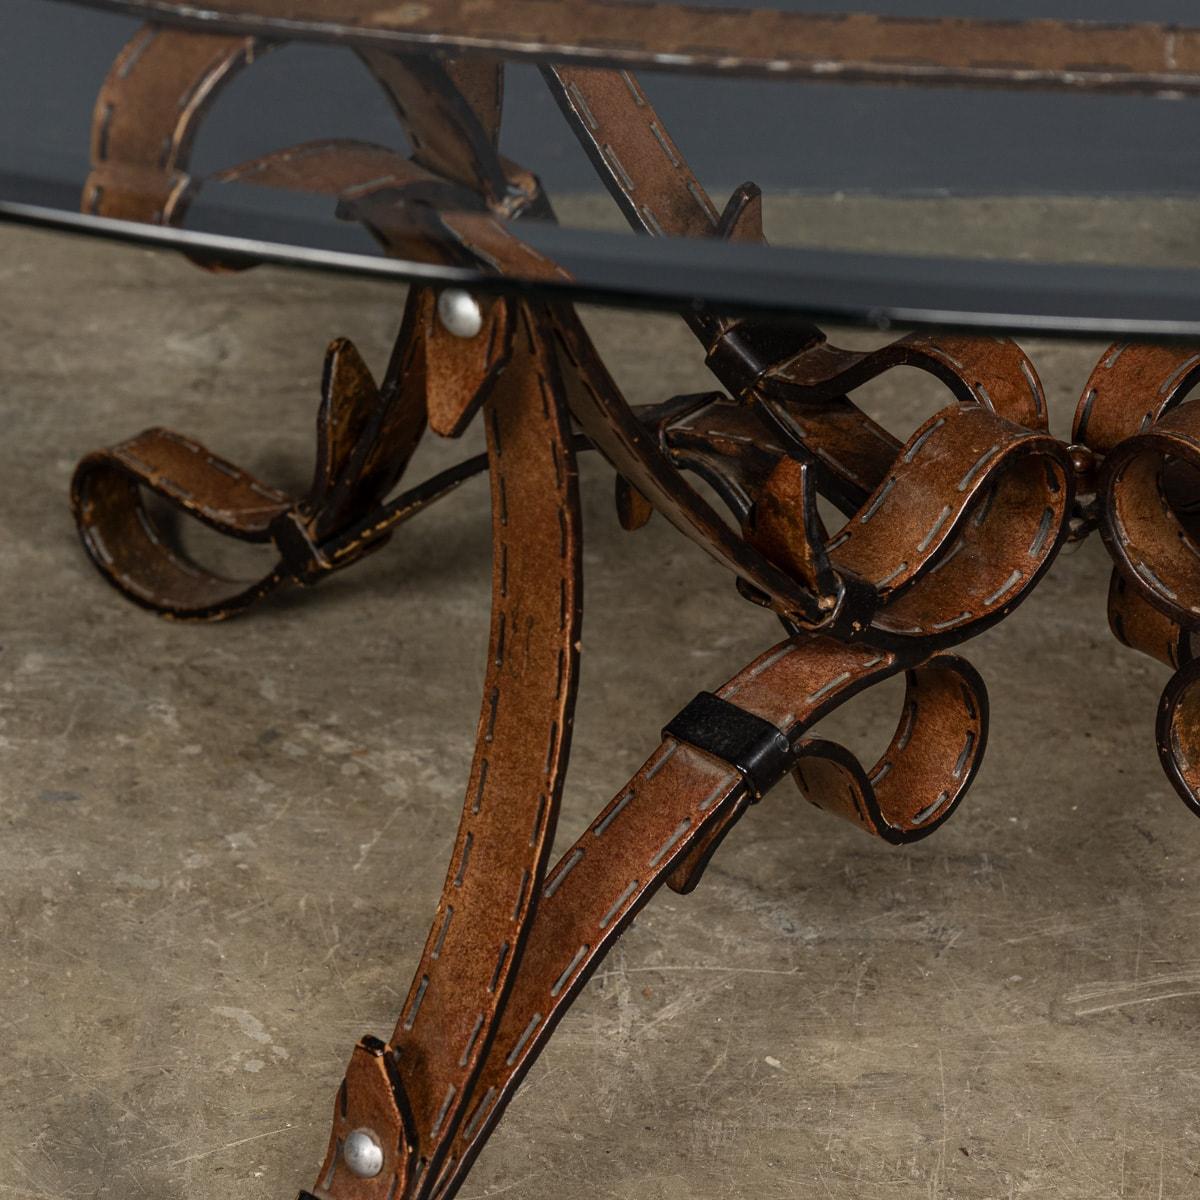 Cold Painted Wrought Iron Strap & Stitch, Glass Top Coffee Table c.1980 In Good Condition For Sale In Royal Tunbridge Wells, Kent